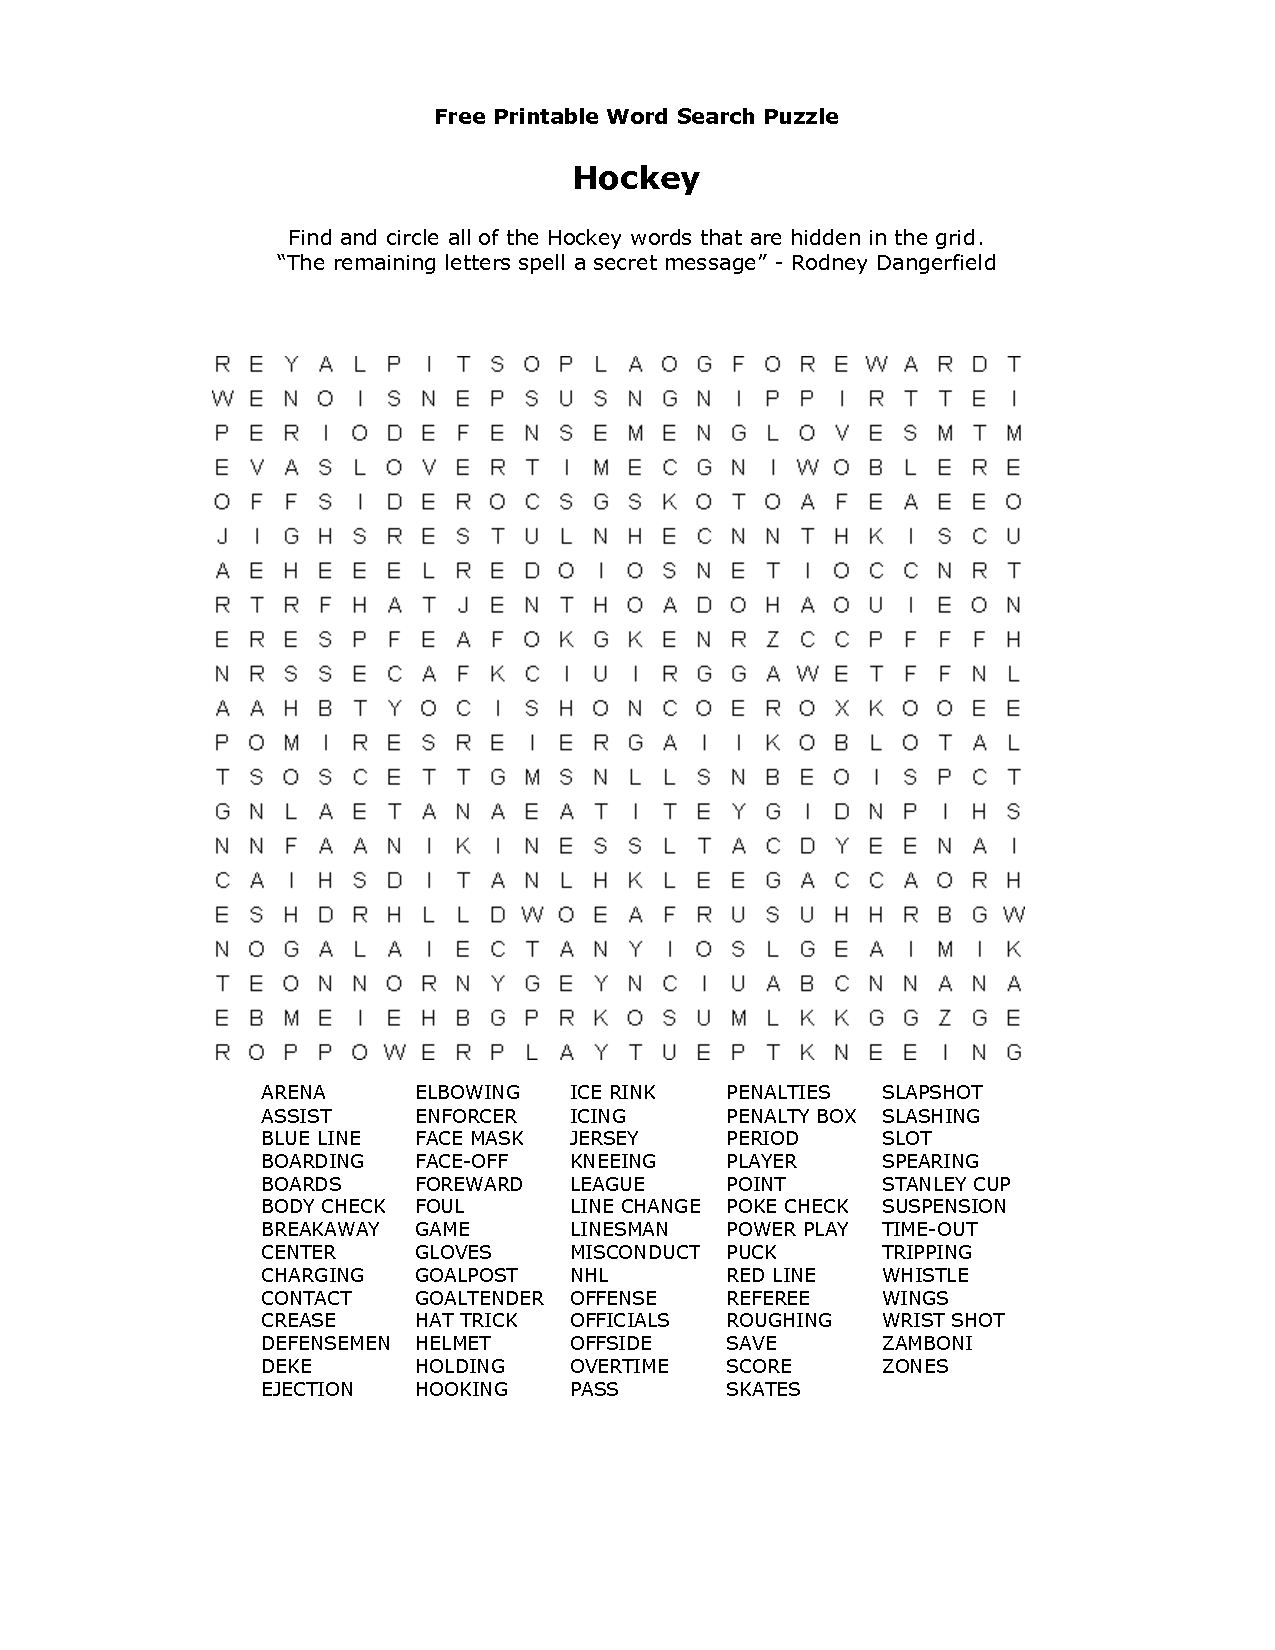 Free Printable Word Searches | Kiddo Shelter | Educative Puzzle For - Free Printable Crossword Puzzles Discovery